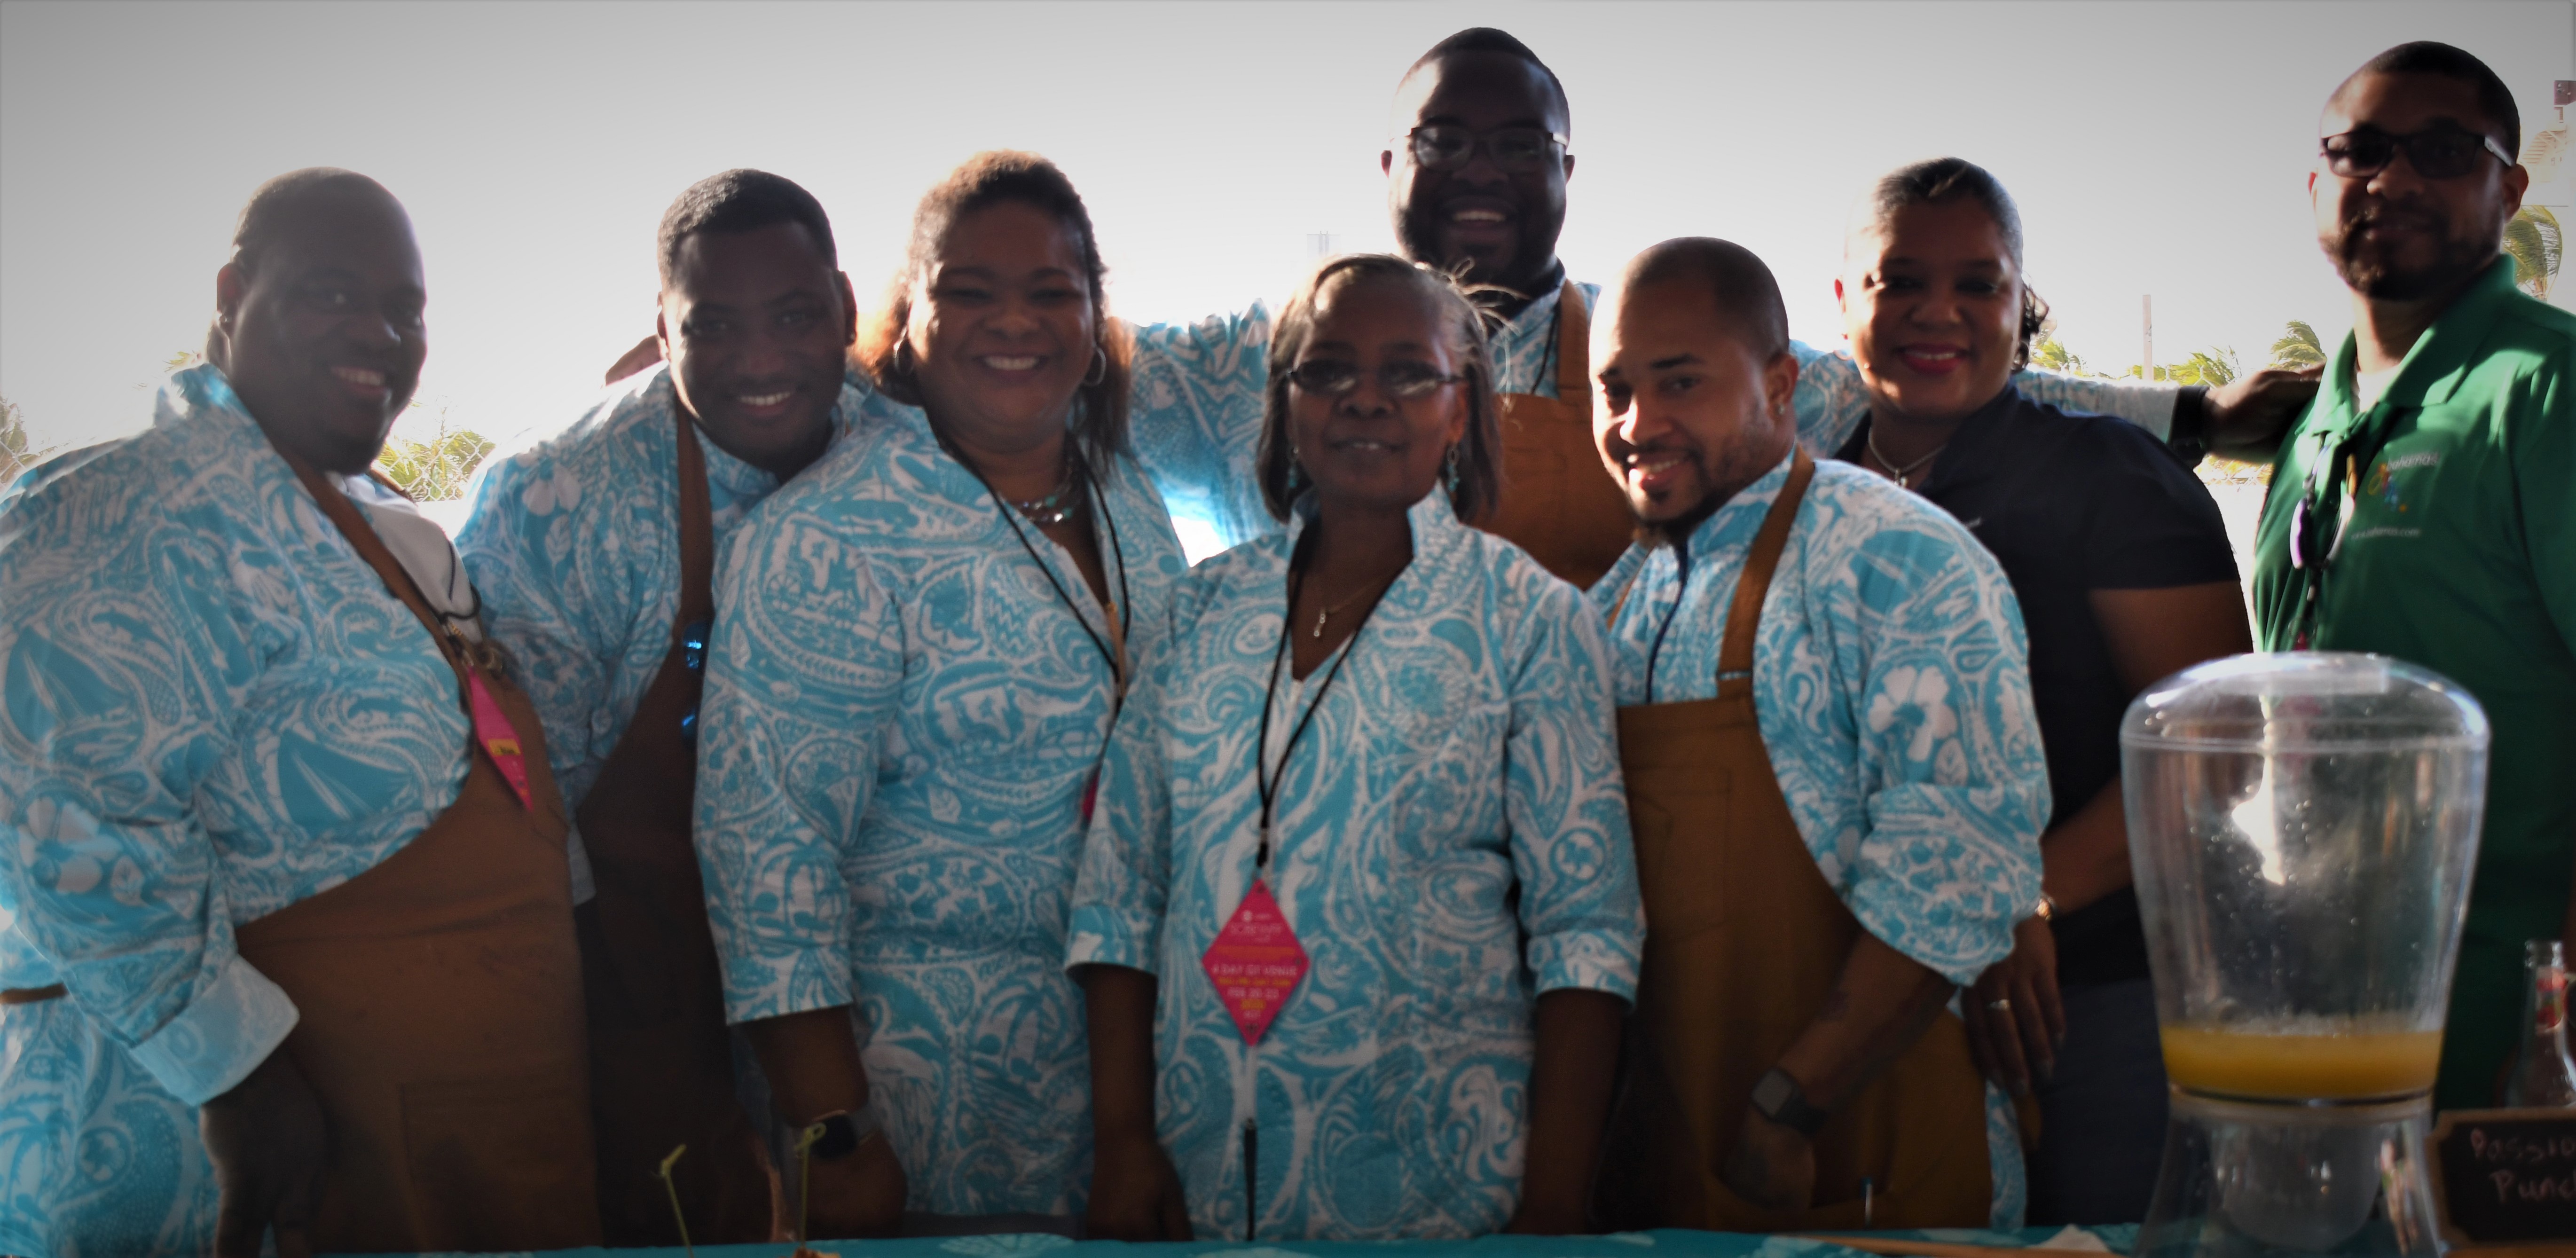 Bahamas Culinary team and local Bahamas Tourism marketing team, that represented the country at the recent 2020 Food Network & Cooking Channel South Beach Wine & Food Festival